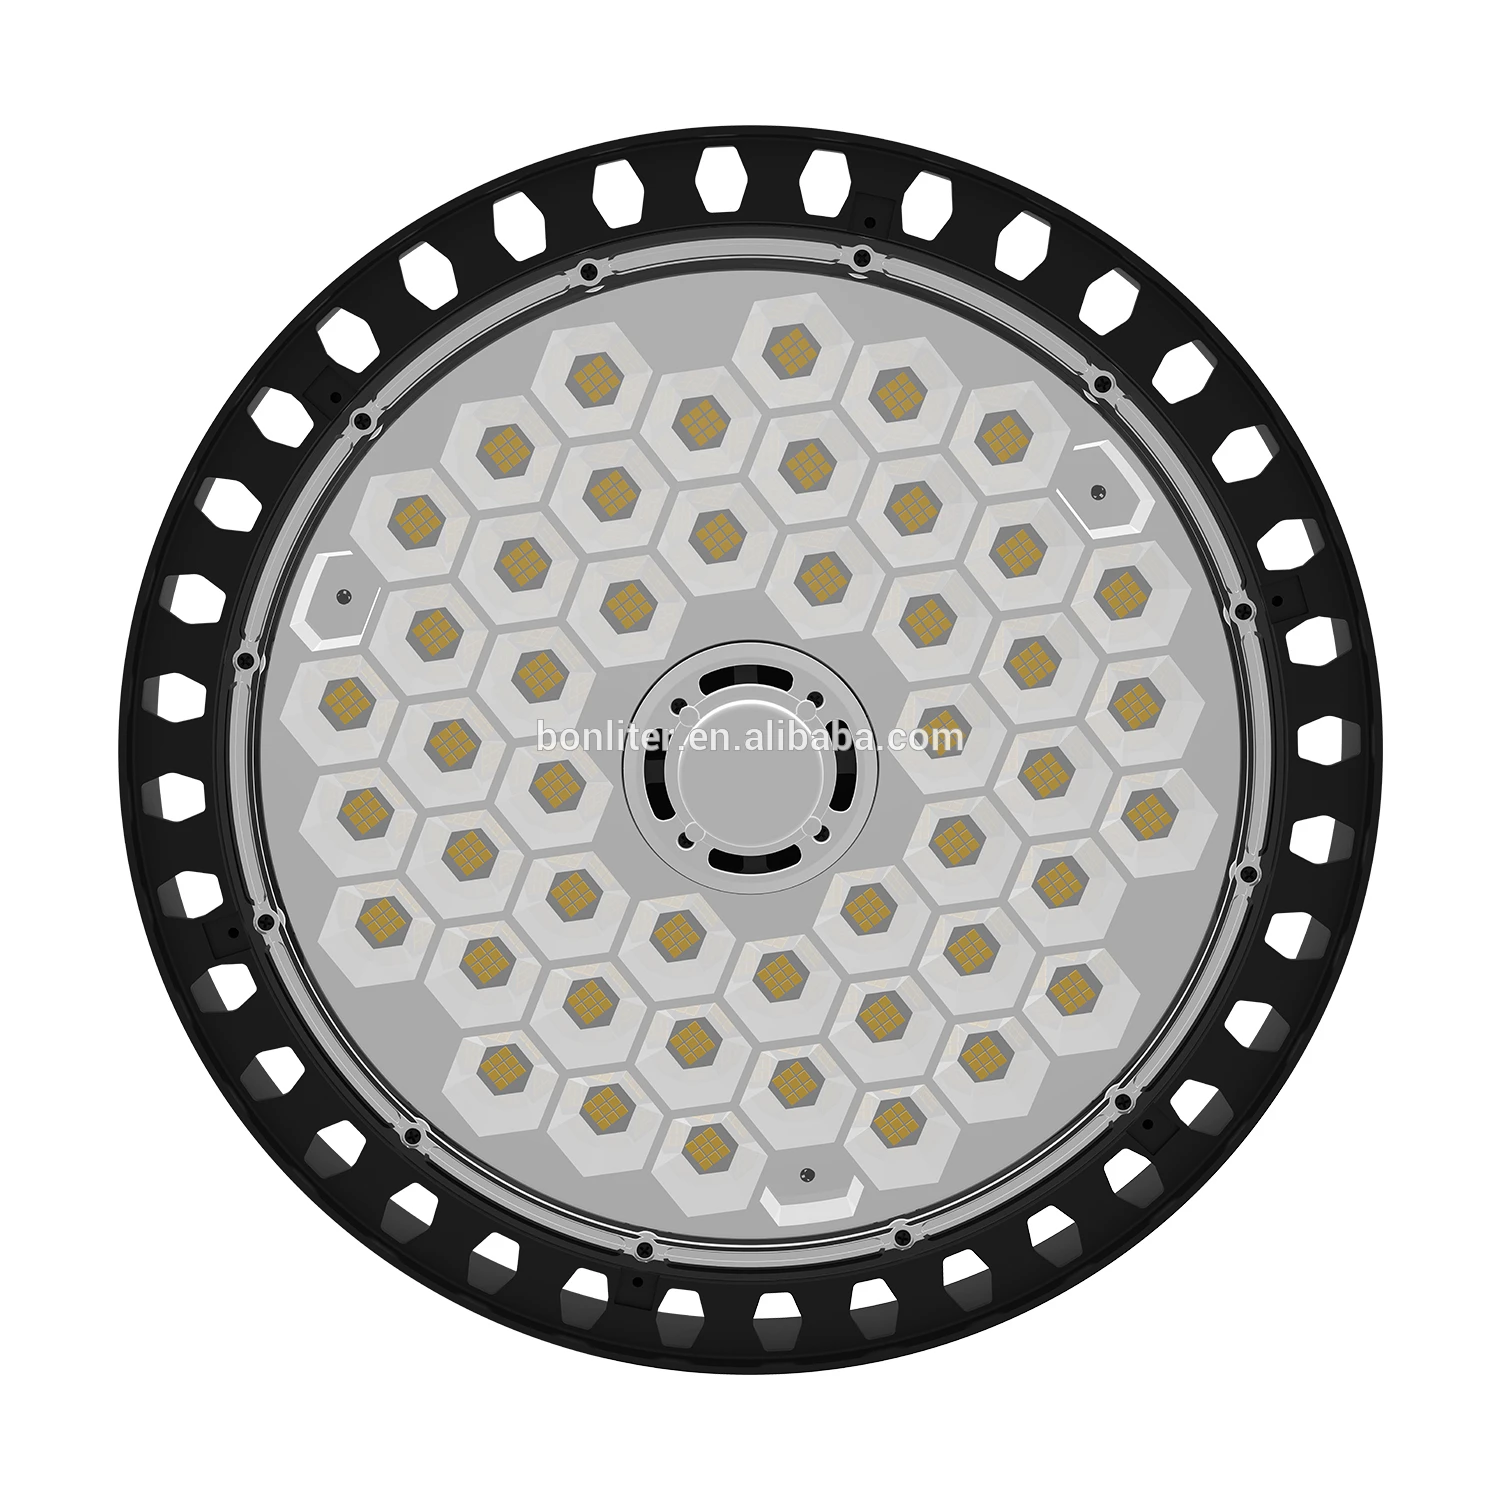 DLC Approval 200W Honeycomb LED UFO High Bay Light low glare&lt;19 Contemporary Style Industrial lamp Working light